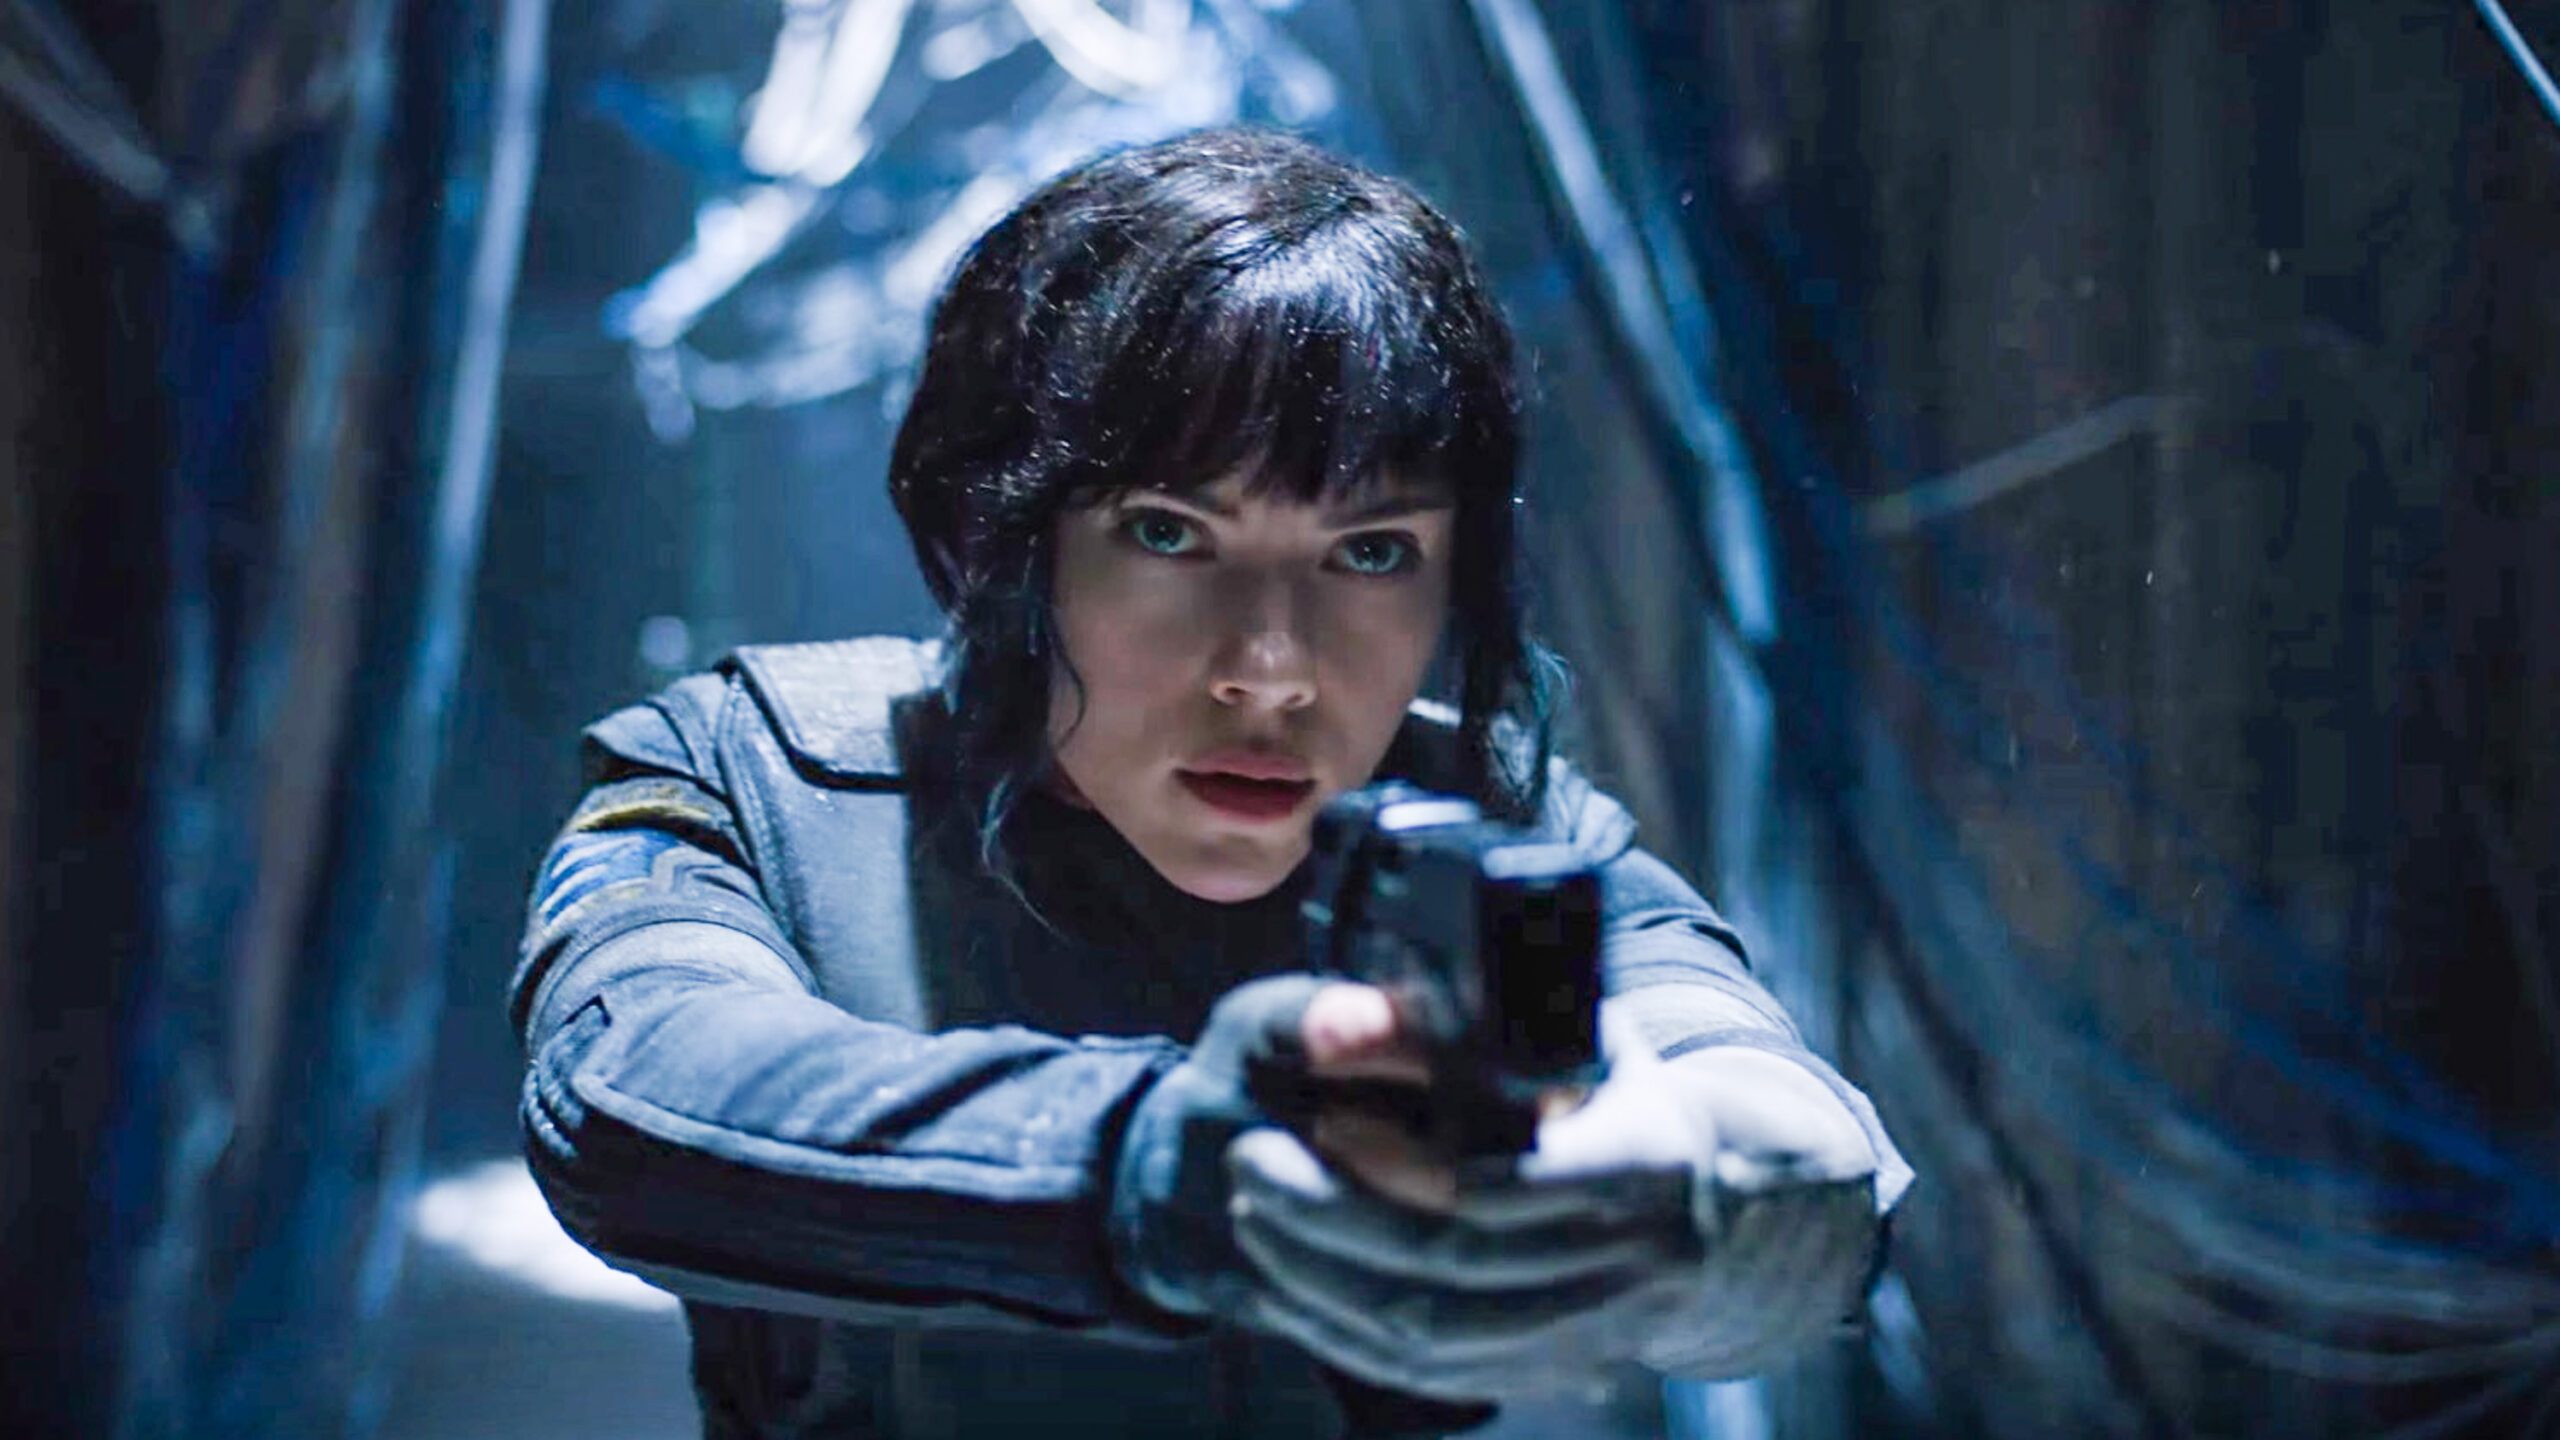 WATCH: ‘Ghost in the Shell’ teasers released